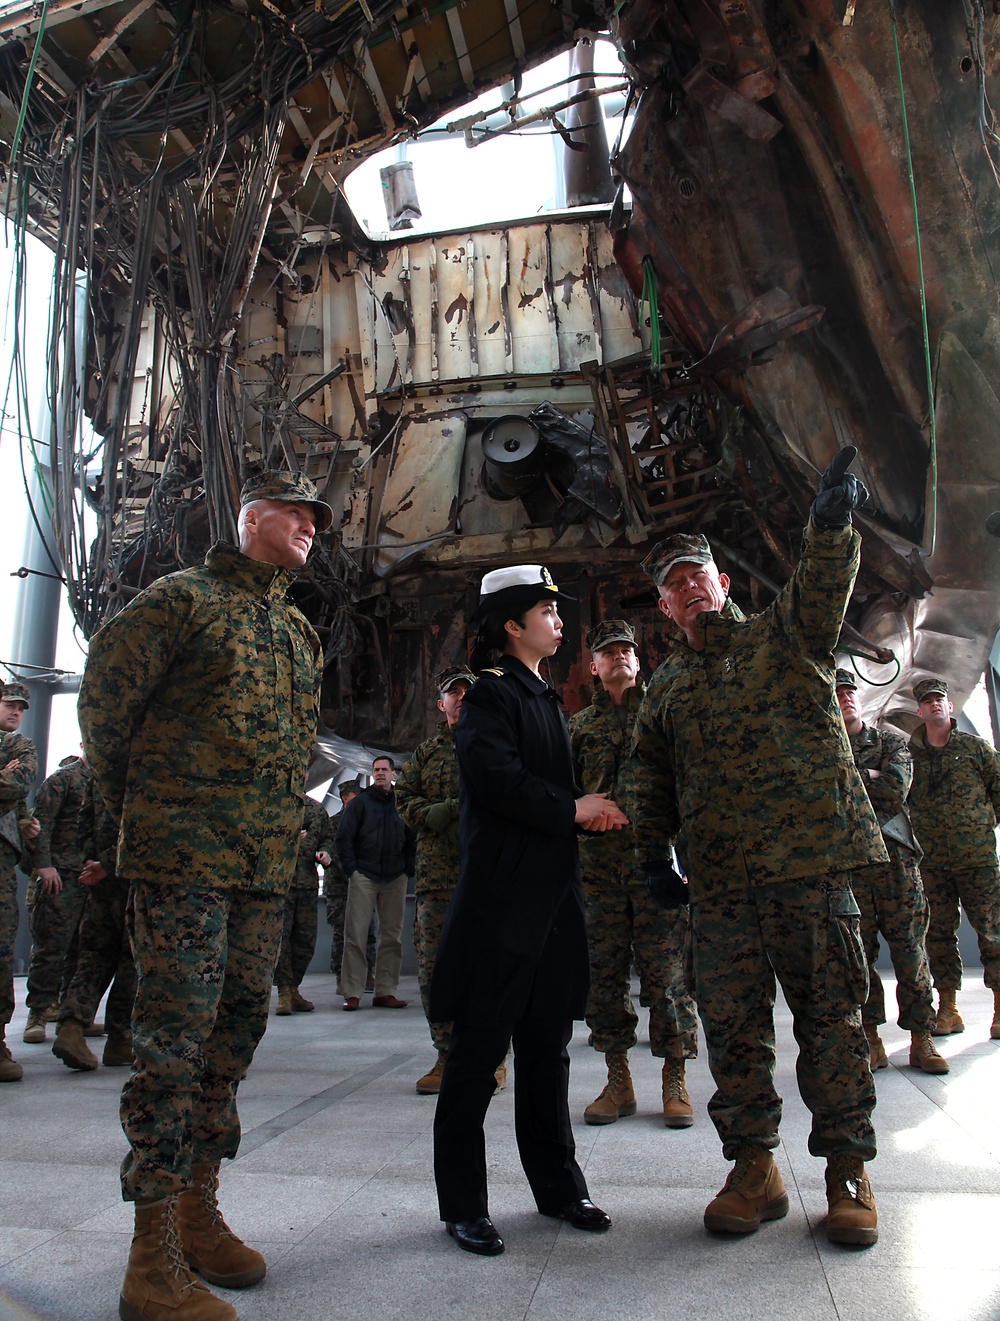 Over 60 U.S. Marine leaders travel to South Korea for talks, increased coordination with ROK forces